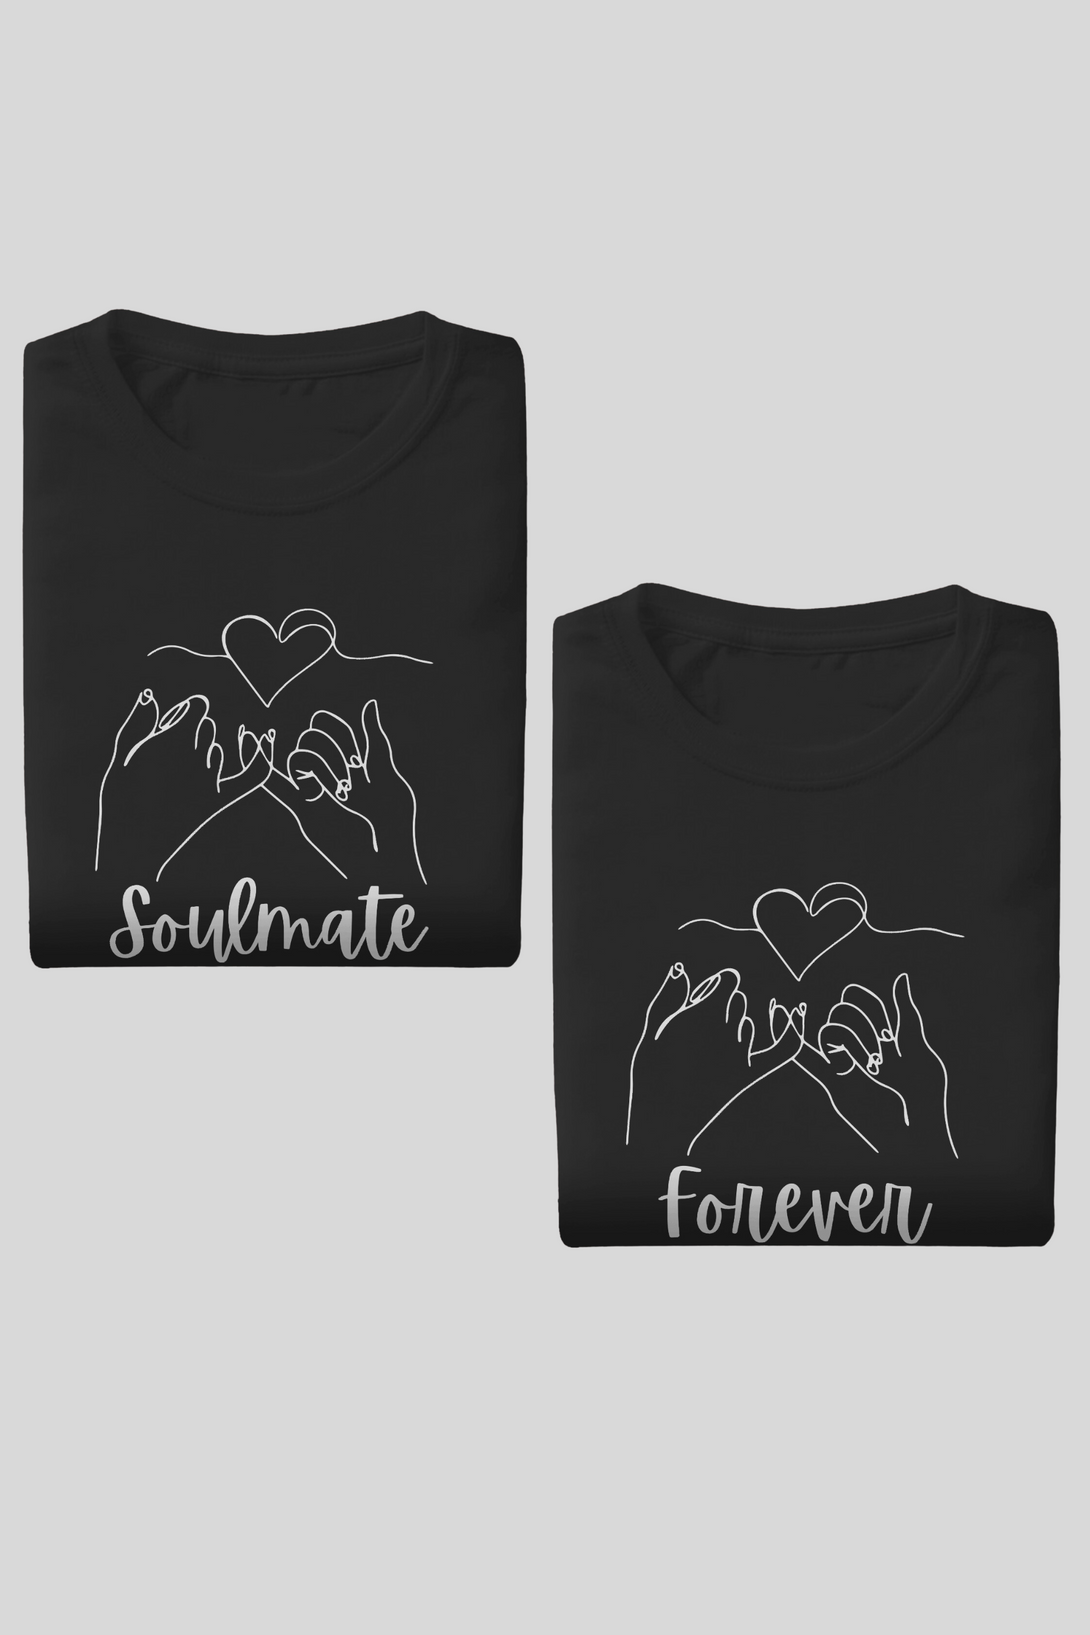 Soulmate Forever Couple T Shirt - WowWaves - 1